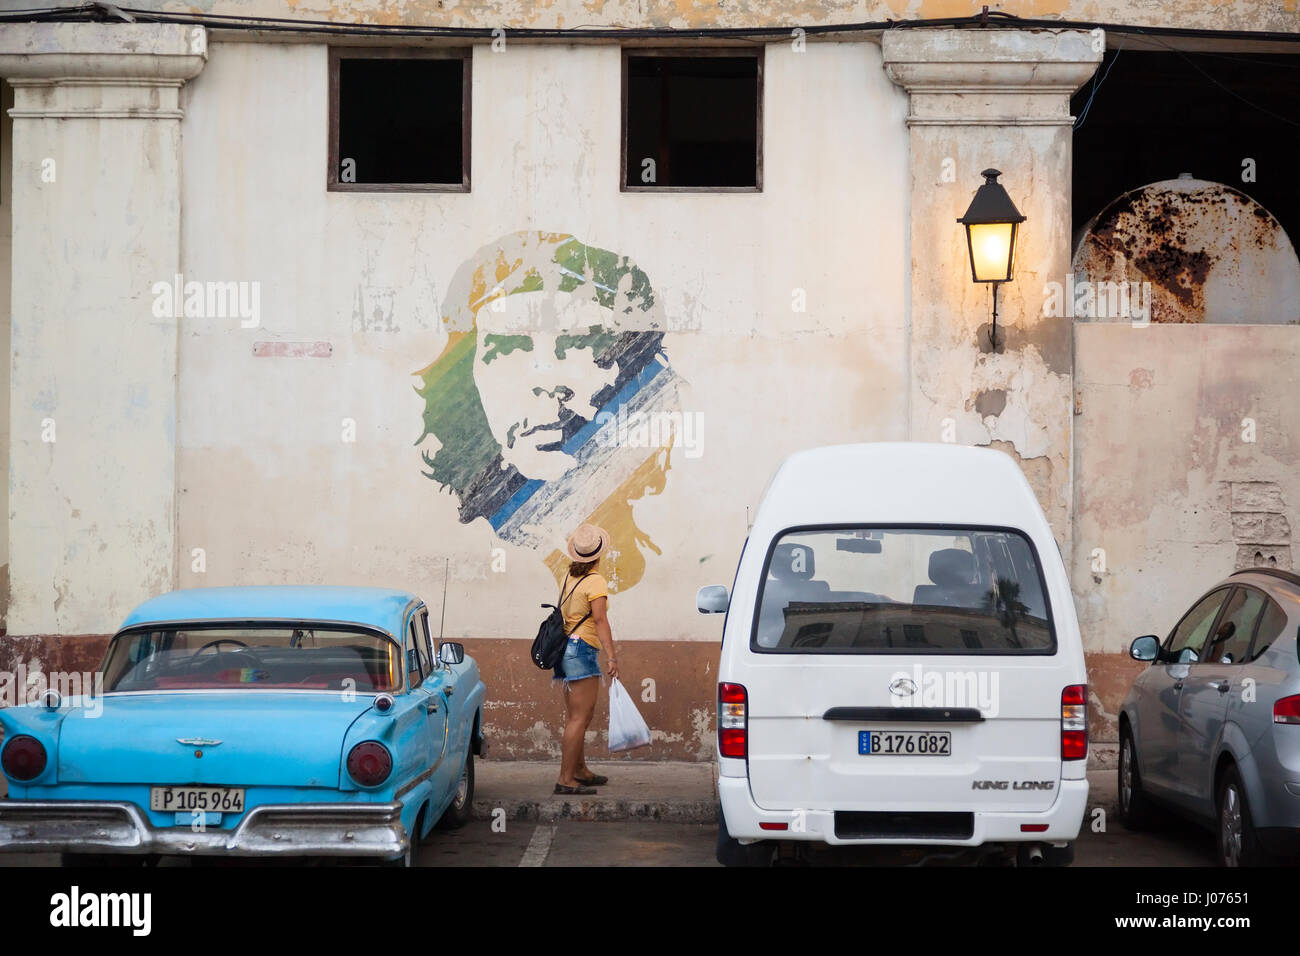 A person looking at Che Guevara graffiti on the side of a building along the Malecon in Old Havana, Cuba. Stock Photo